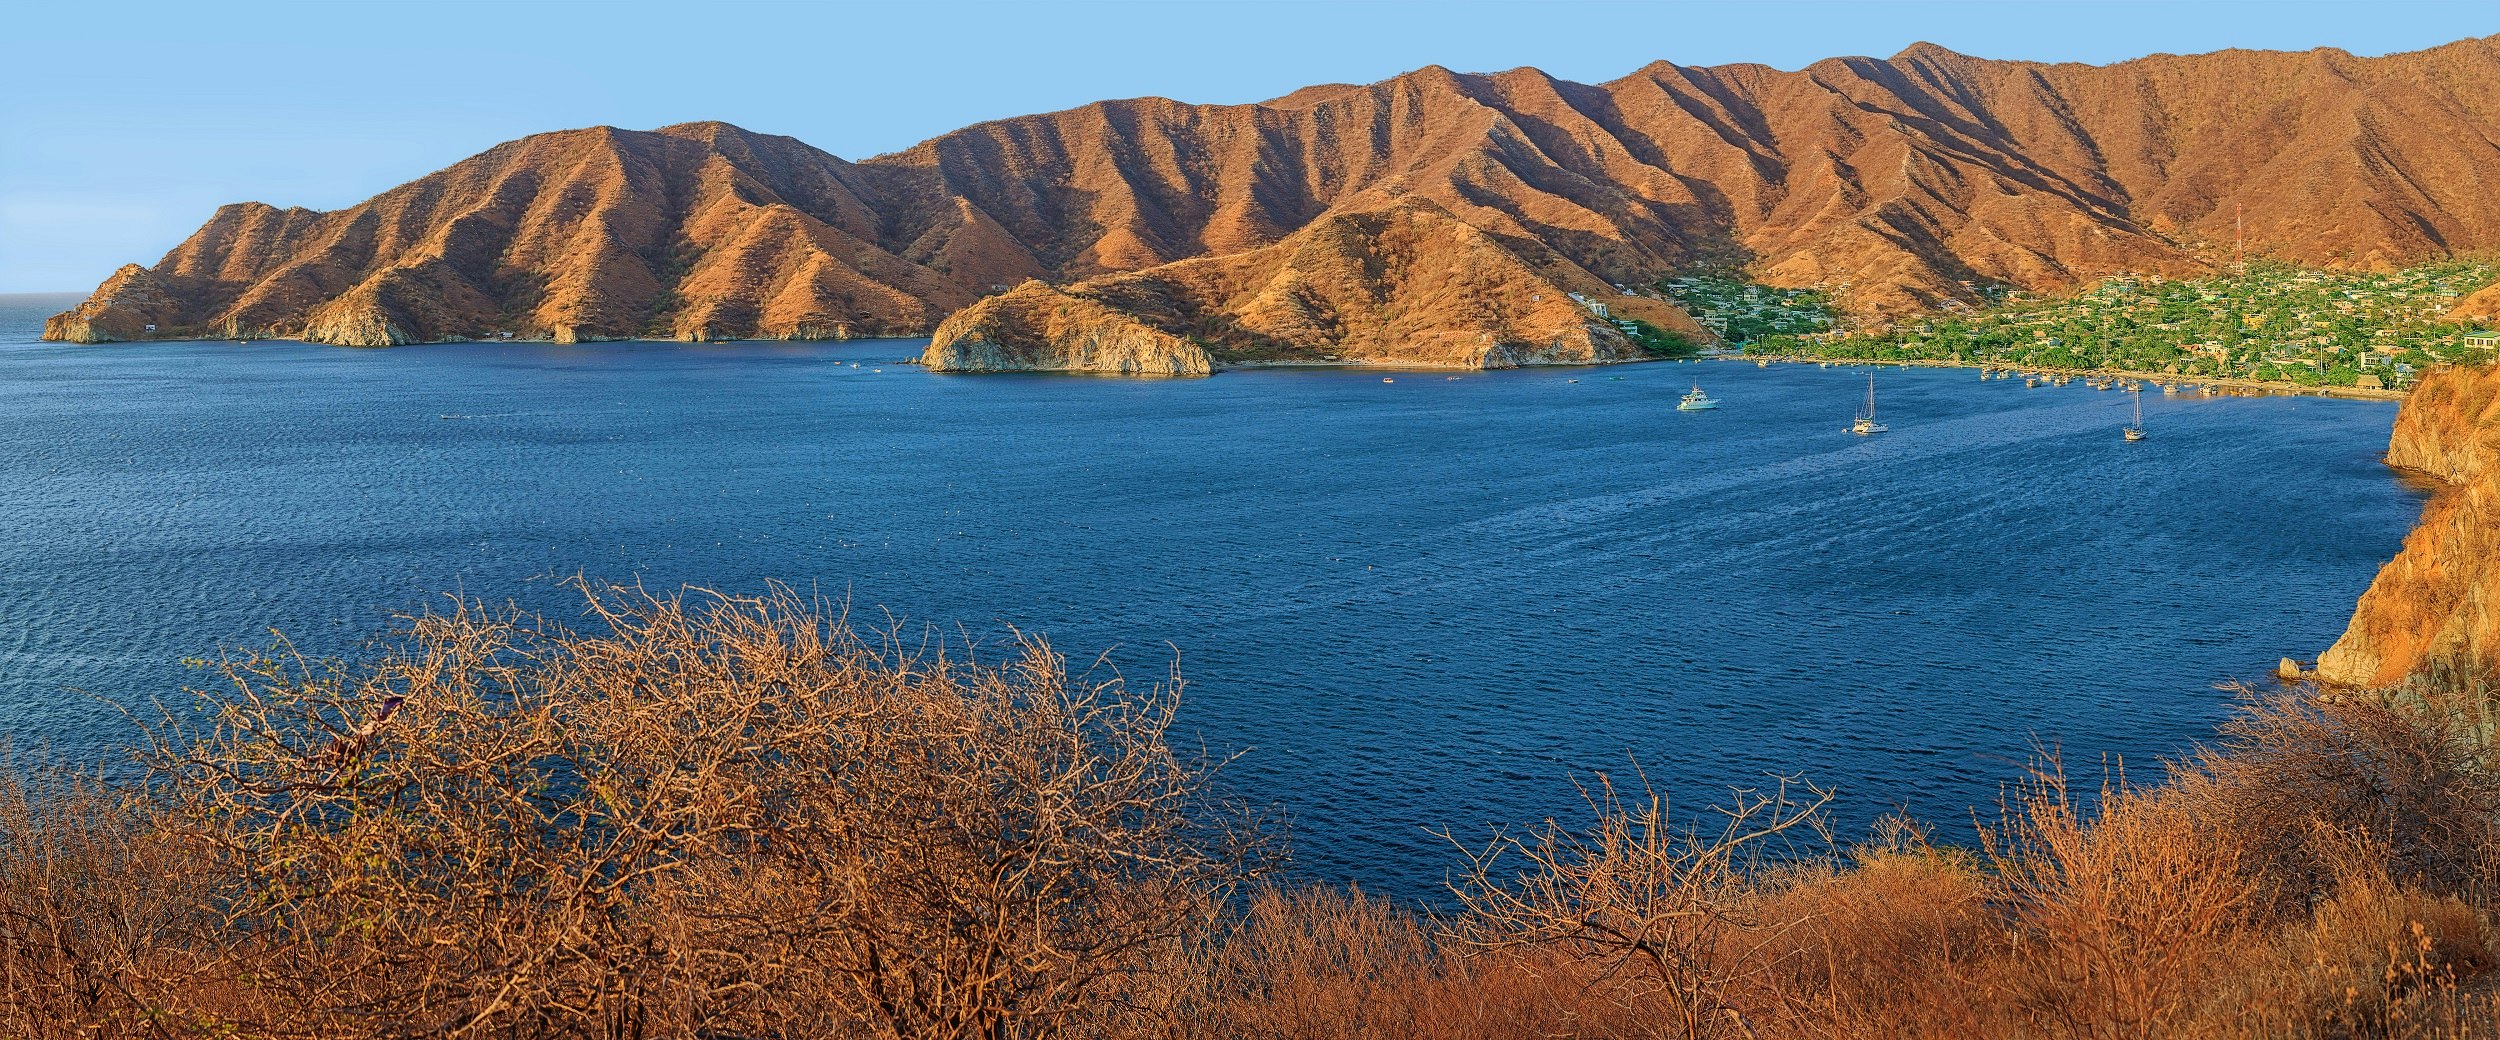 A shot looking down over a large bay; the arms of the bay are made up of orange, almost crenulated hills that plunge to the ocean. The heart of the bay on the shore is a flat patch of green, where the village of Taganga resides.